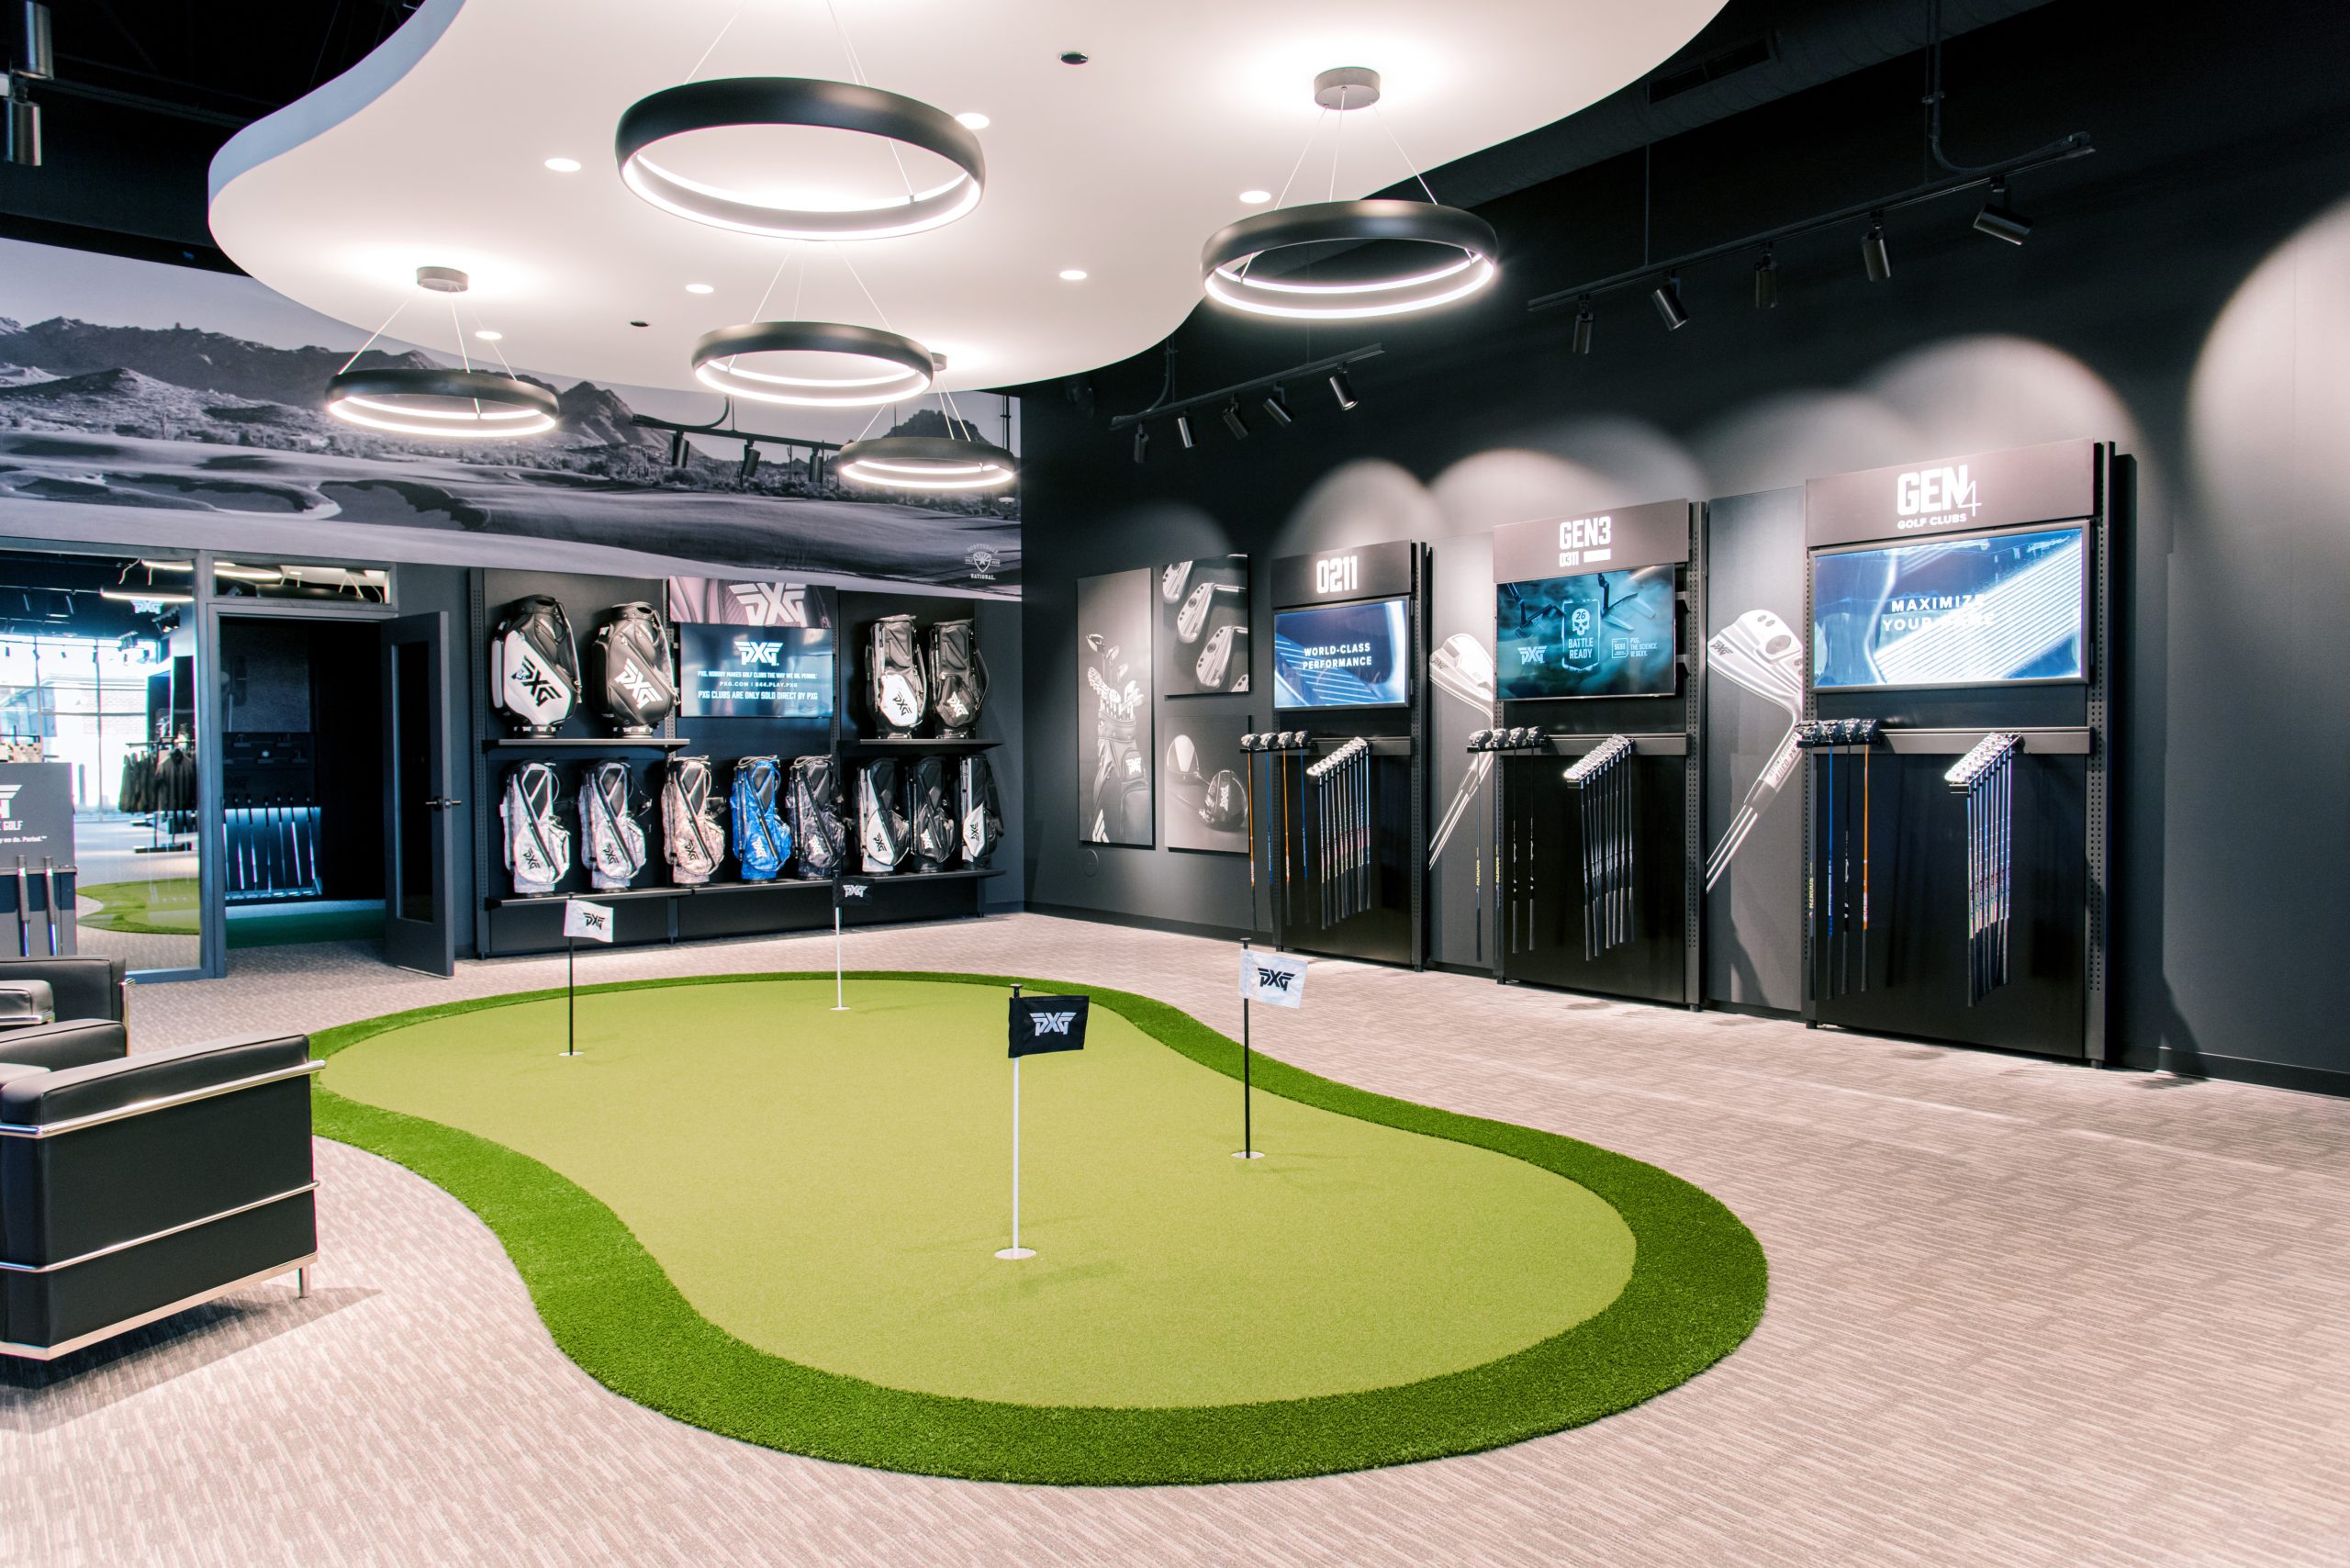 Premier PXG Custom Golf Club Fitting & Retail Experience Now Open in South  London